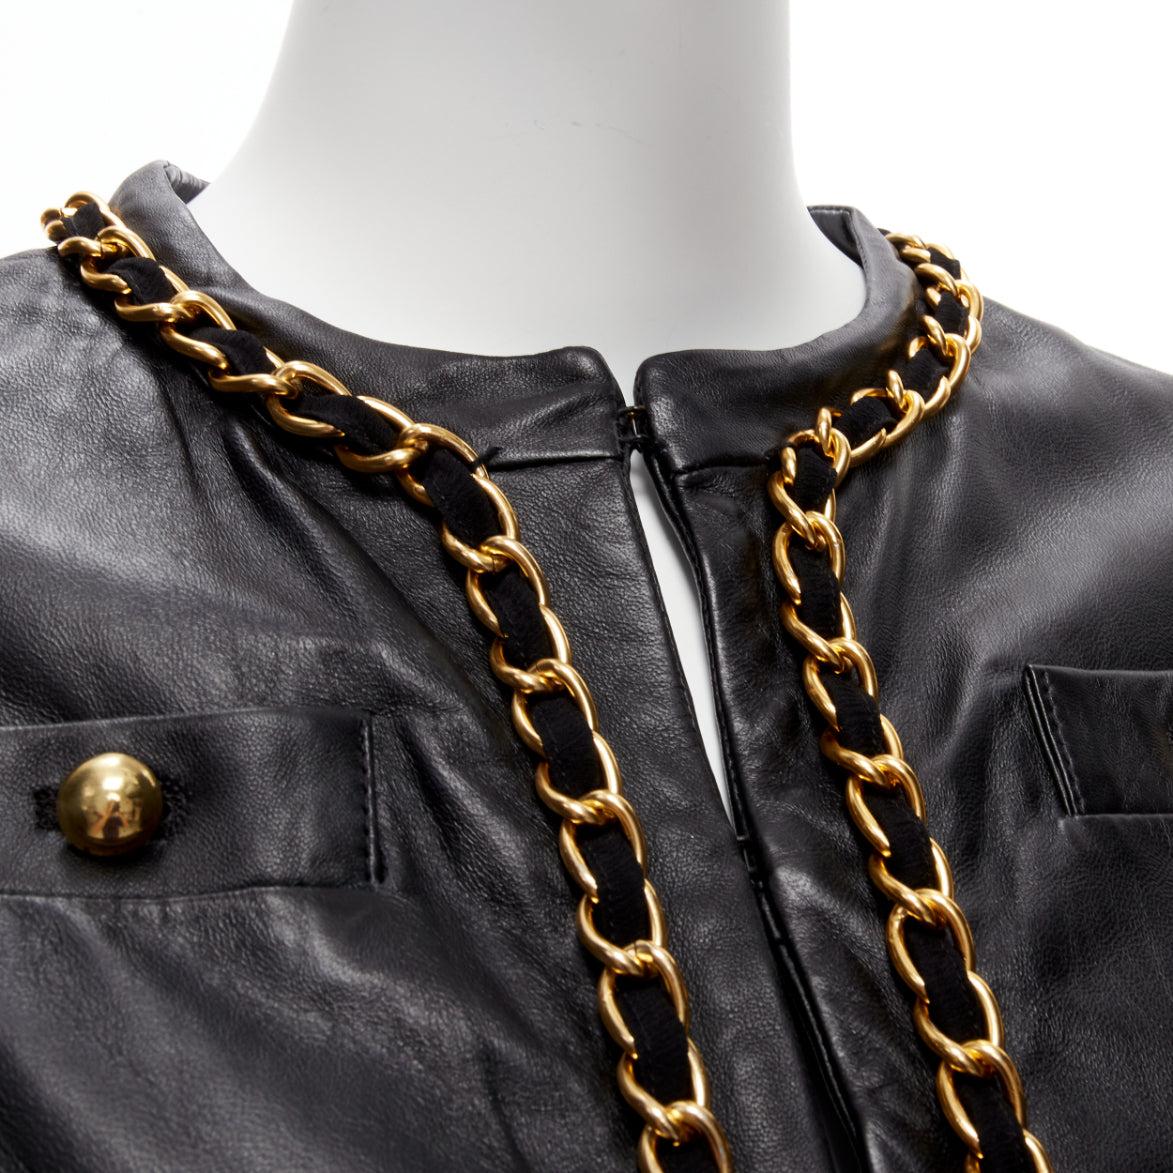 rare MOSCHINO Cheap Chic gold chain black quilted leather cropped jacket IT38 XS
Reference: TGAS/D00523
Brand: Moschino
Collection: Cheap and Chic
Material: Leather, Metal
Color: Black, Gold
Pattern: Solid
Closure: Hook & Bar
Lining: Black